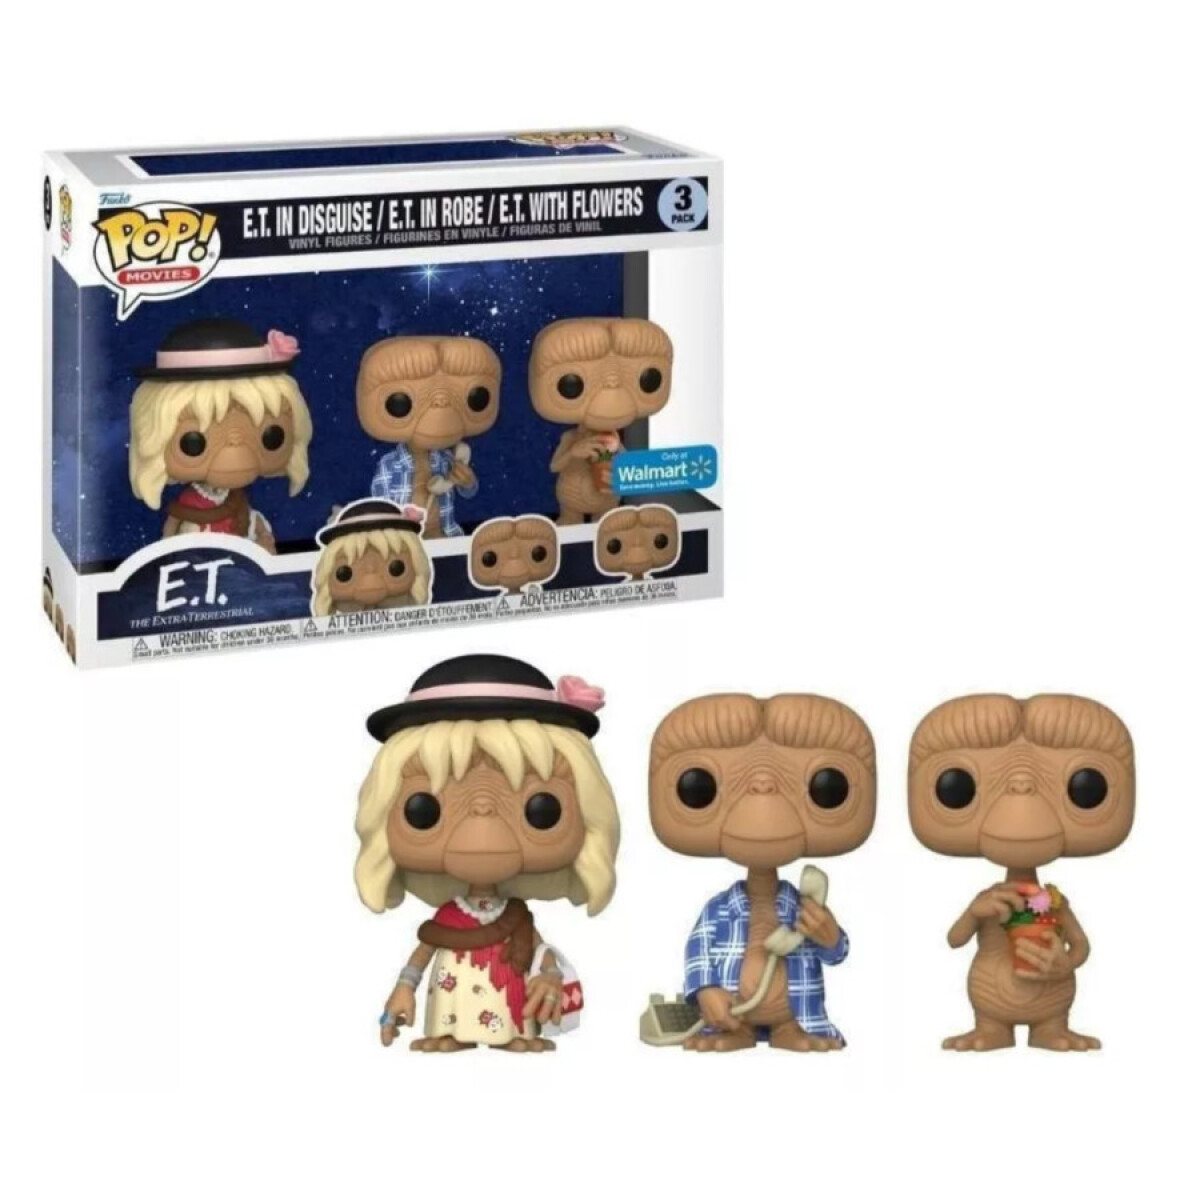 E.T. triple pack • E.T. The Extra-Terrestrial [Exclusivo] - 3 